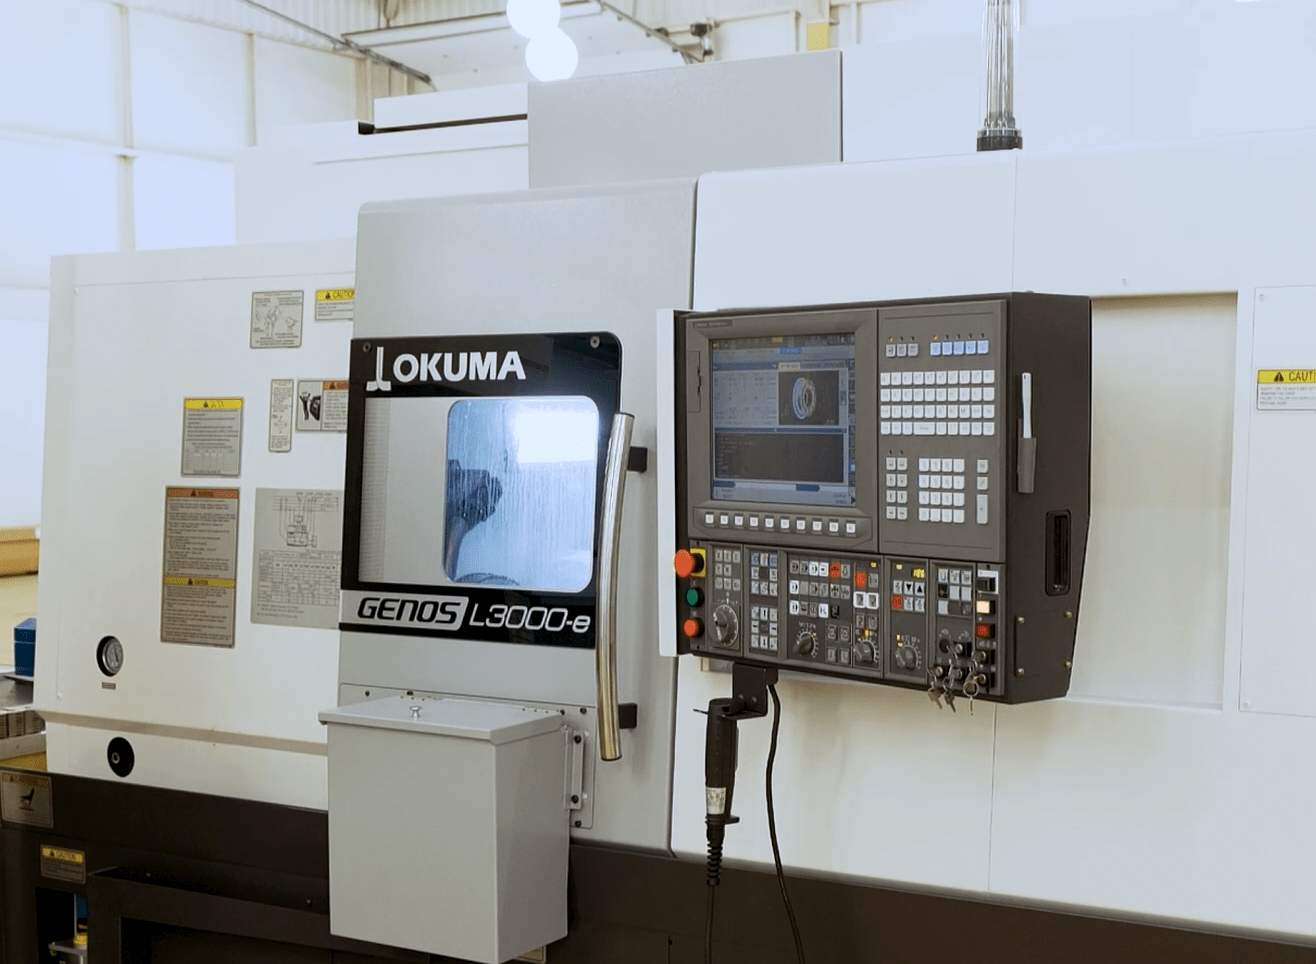 Always wanted an OKUMA? How about this one!